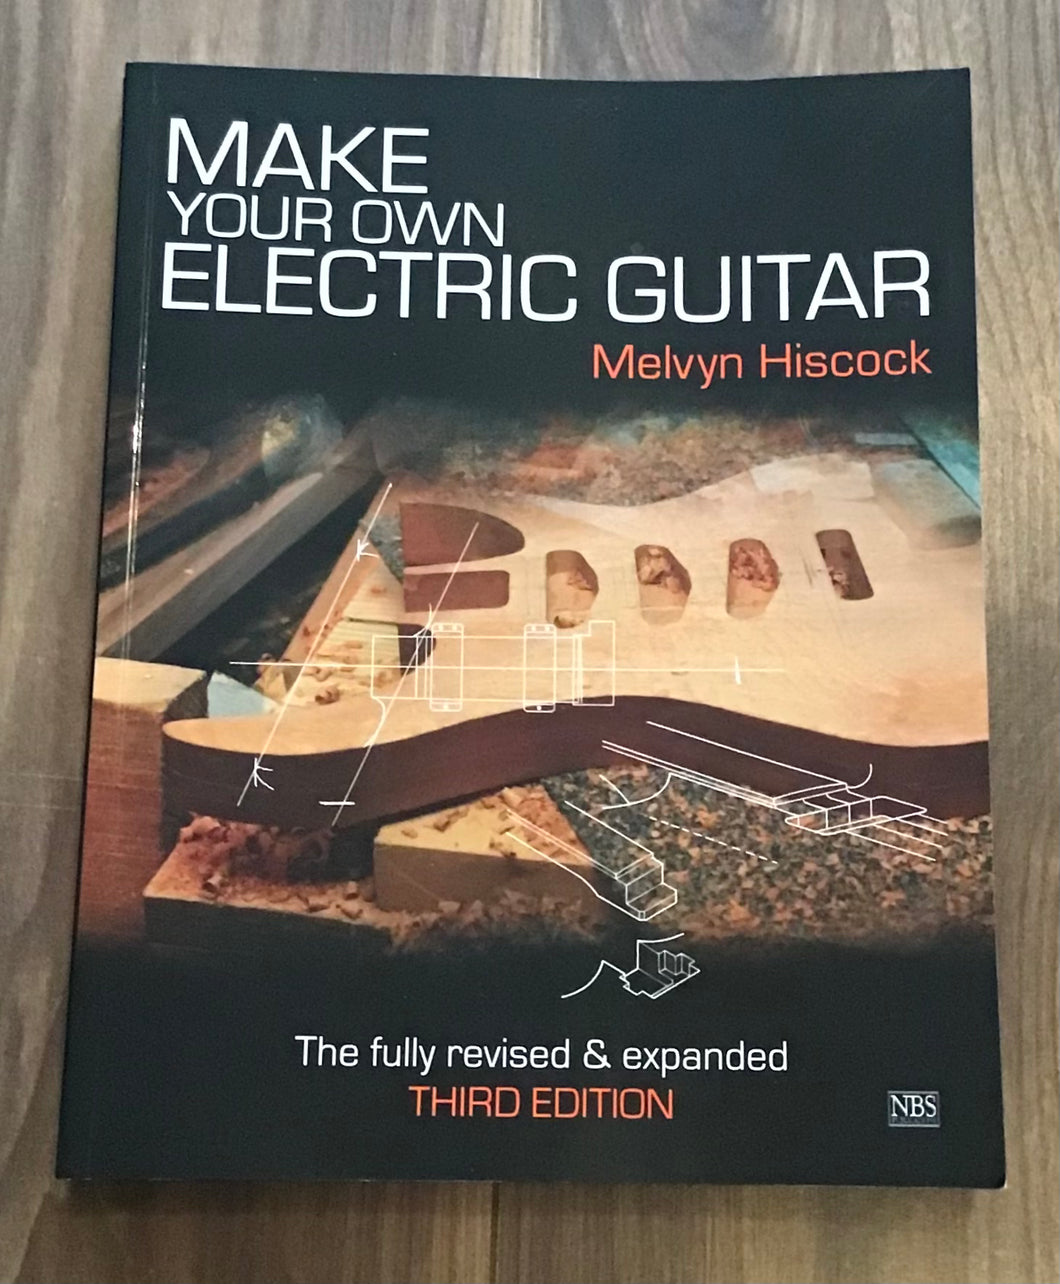 HOW TO MAKE YOUR OWN ELECTRIC GUITAR BOOK